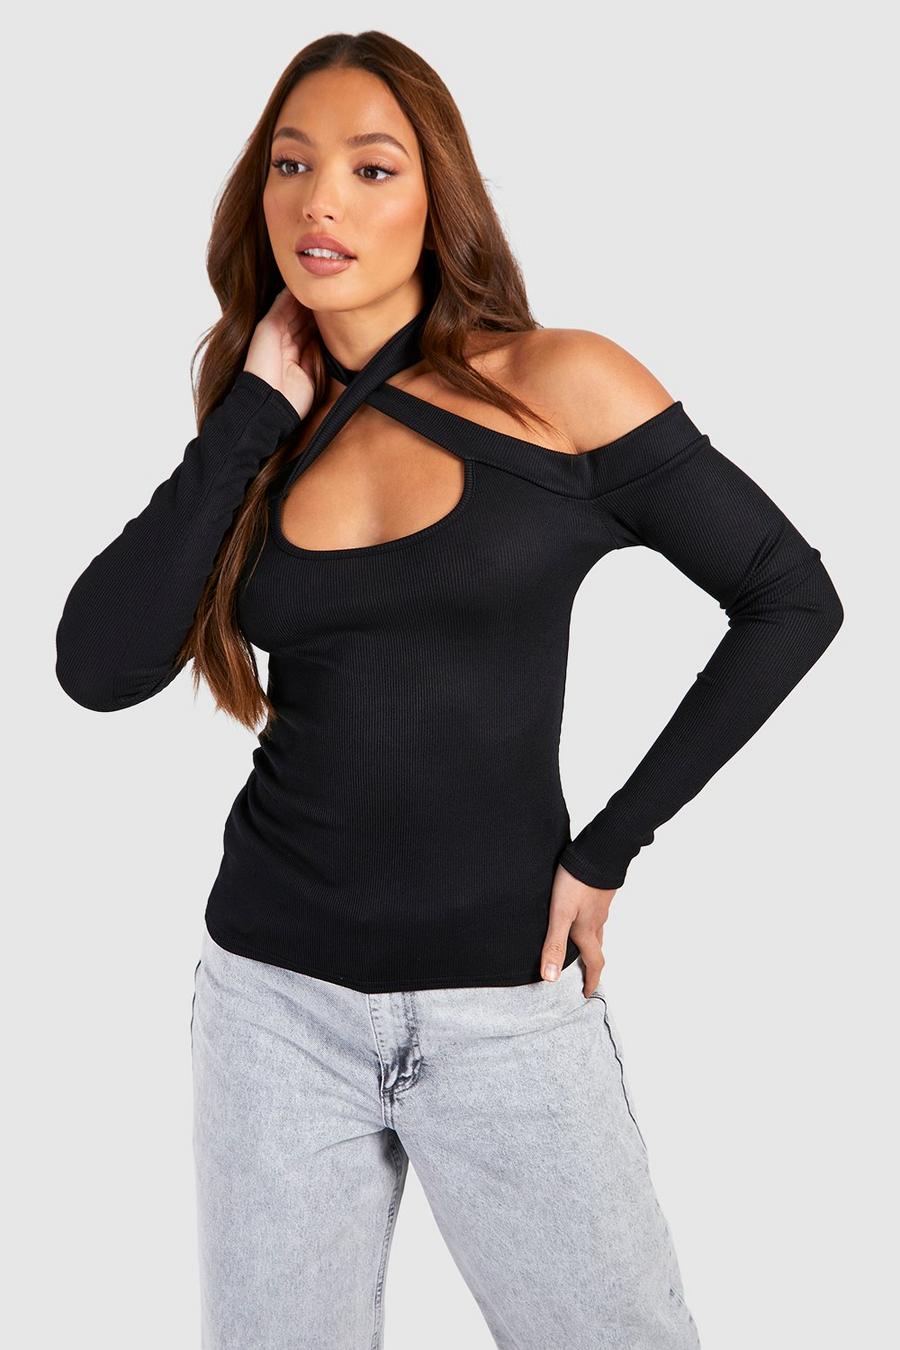 Black Tall Rib Cut Out Halter Longsleeve Top image number 1